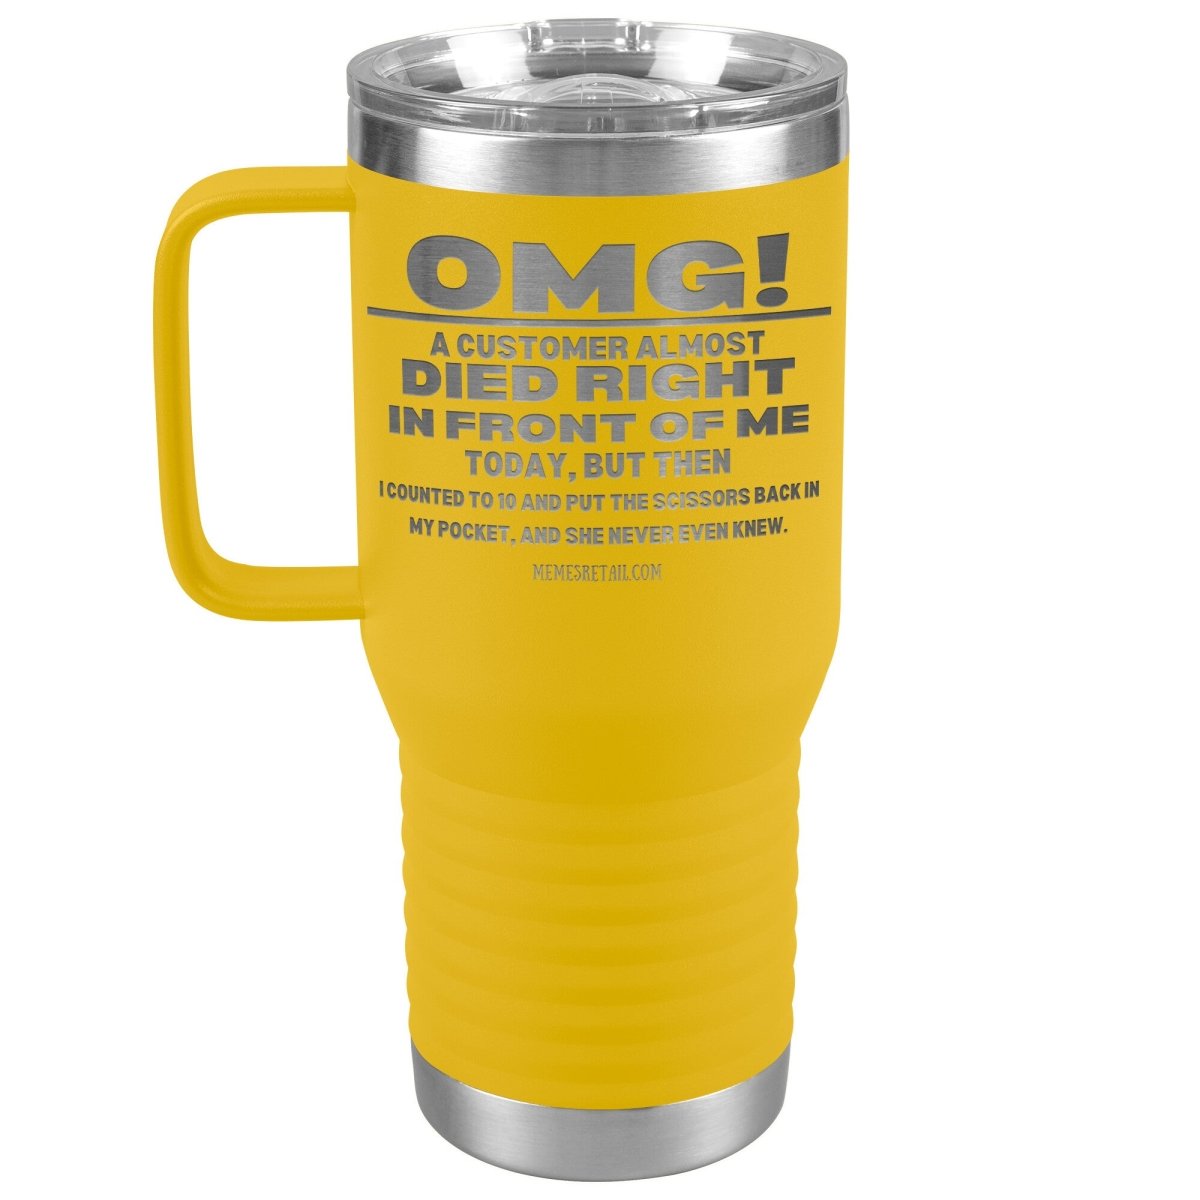 OMG! A Customer Almost Died Right In Front Of Me Tumbler, 20oz Travel Tumbler / Yellow - MemesRetail.com